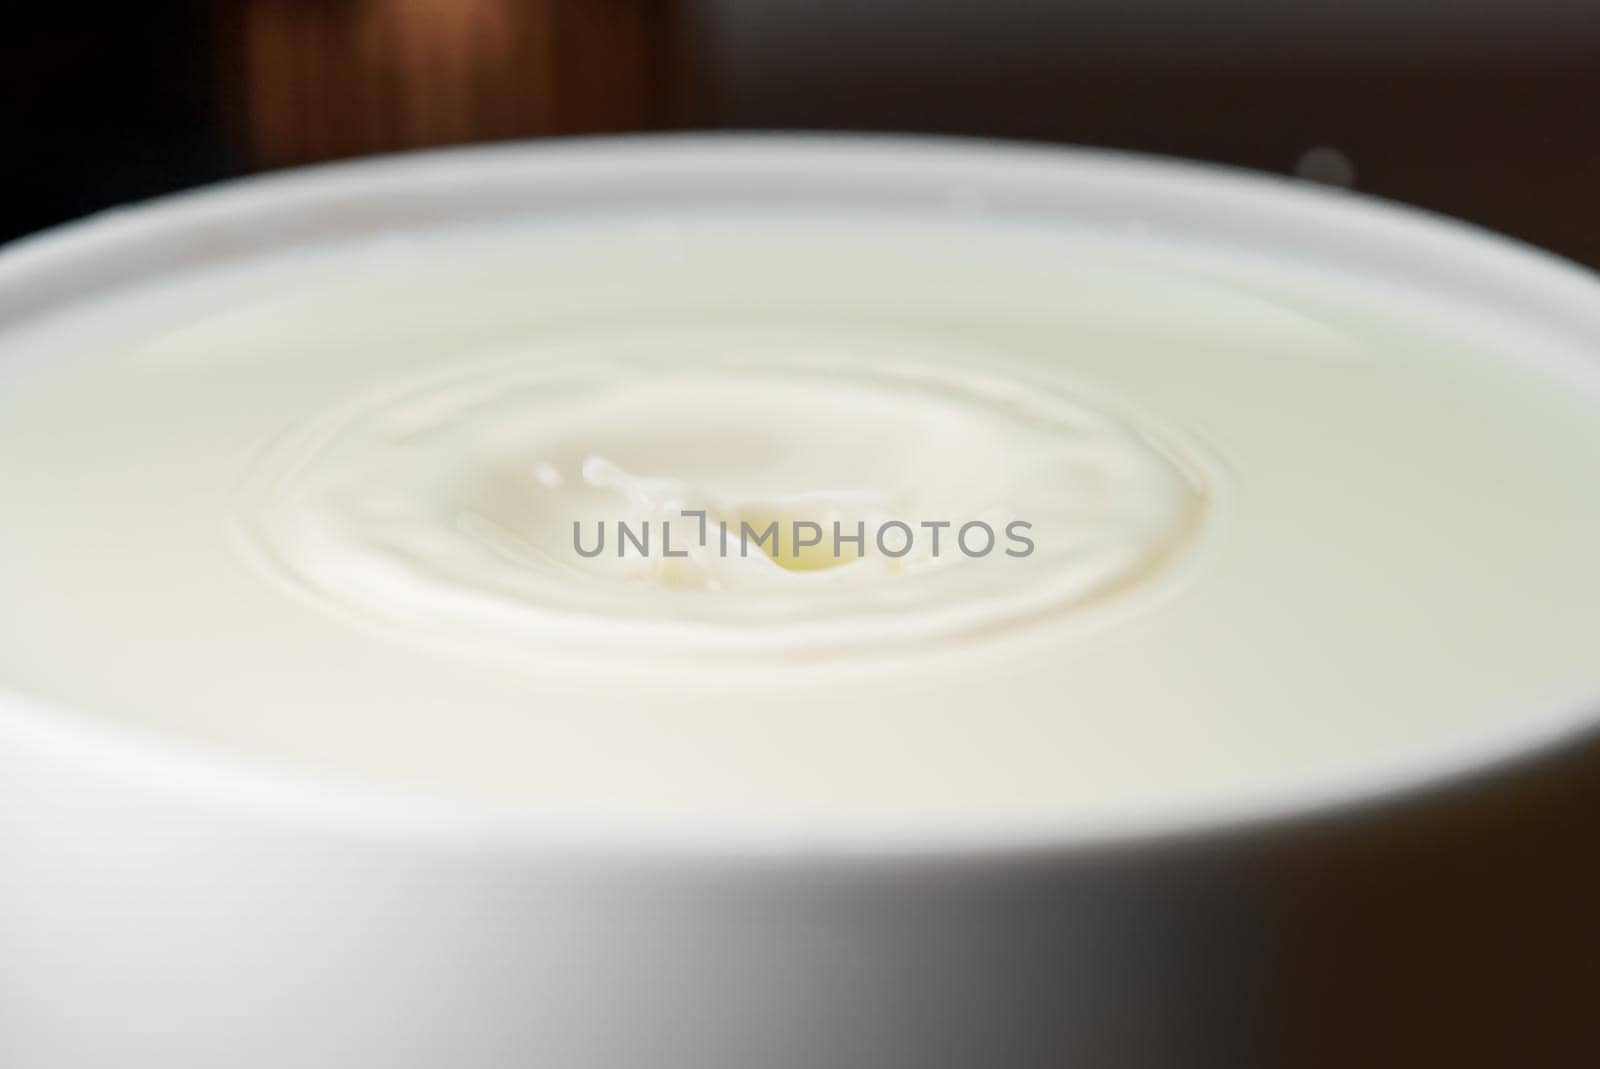 Milk drop falls into the filled cup.